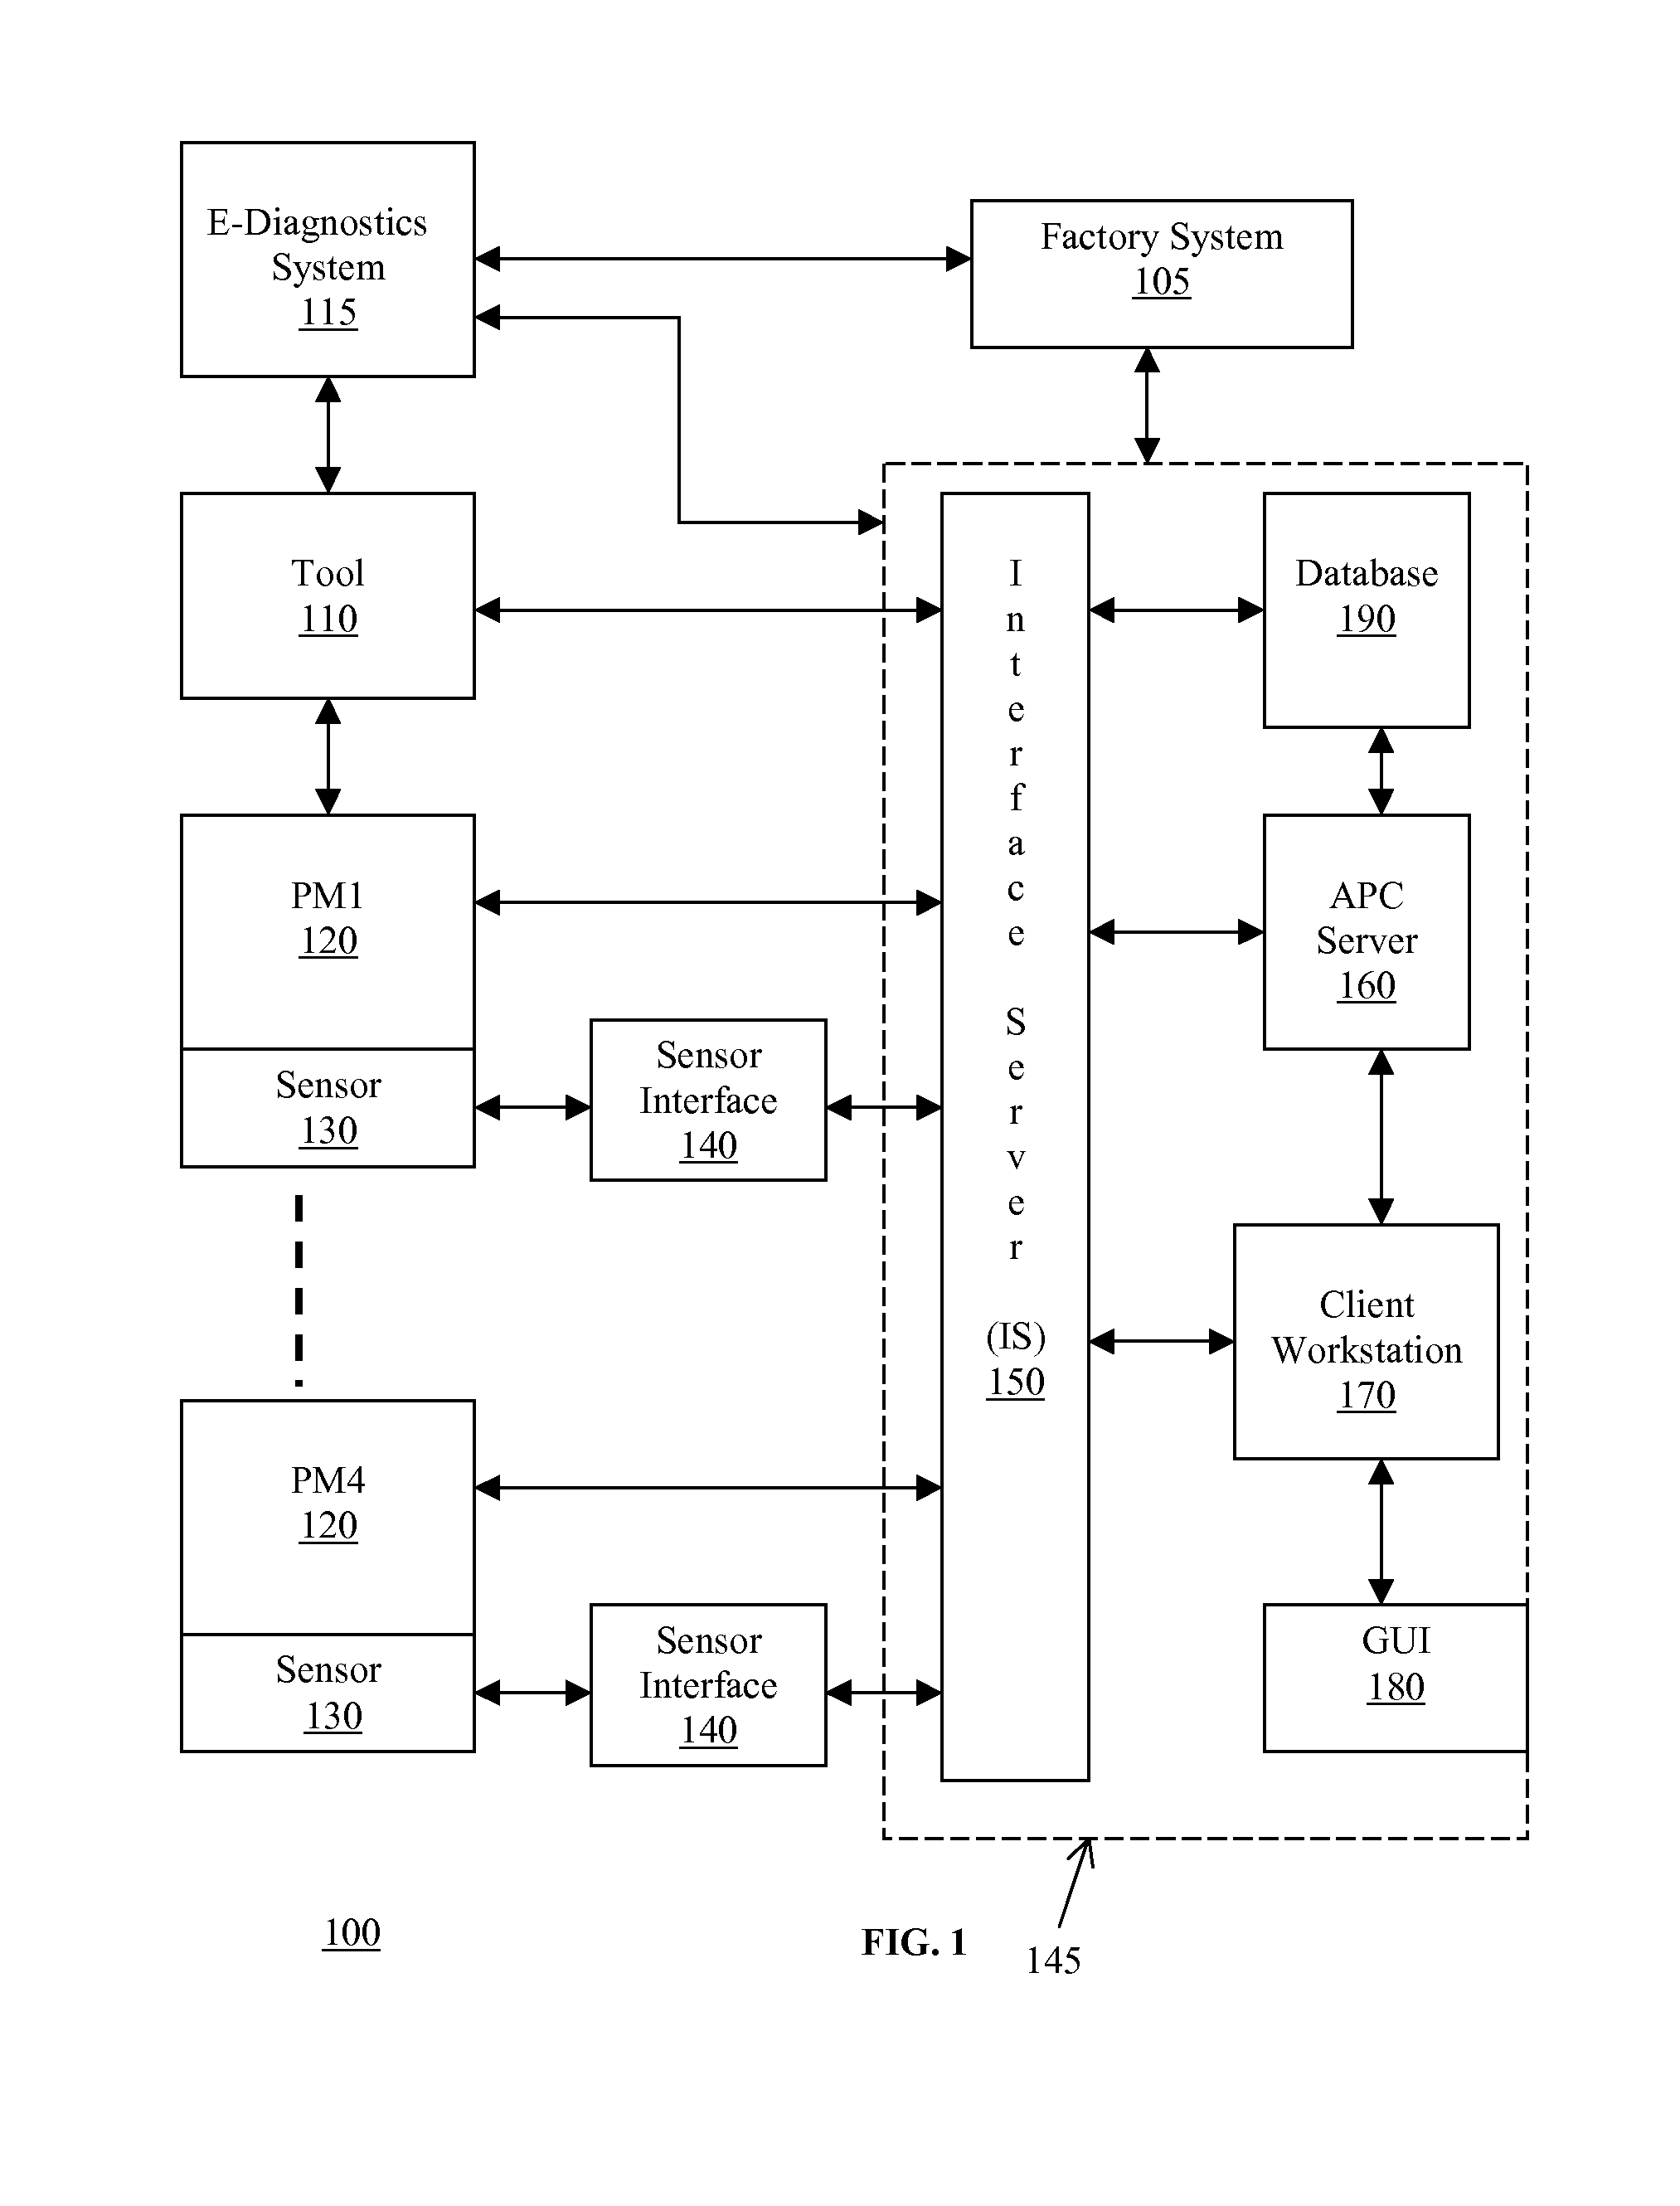 Method for processing data based on the data context